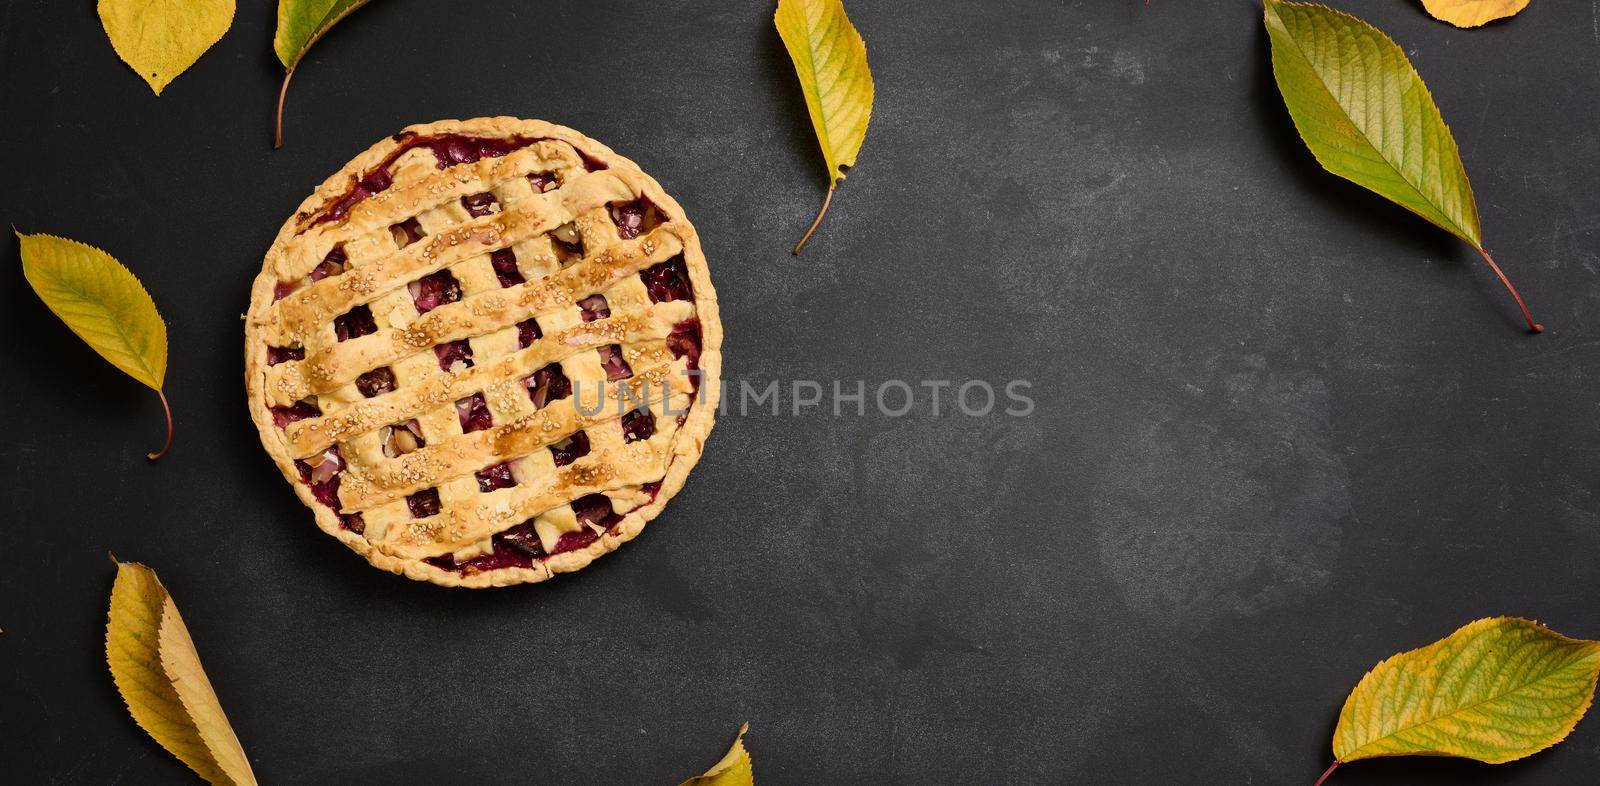 baked round pie with plums on a black background, top view. Place for inscription by ndanko